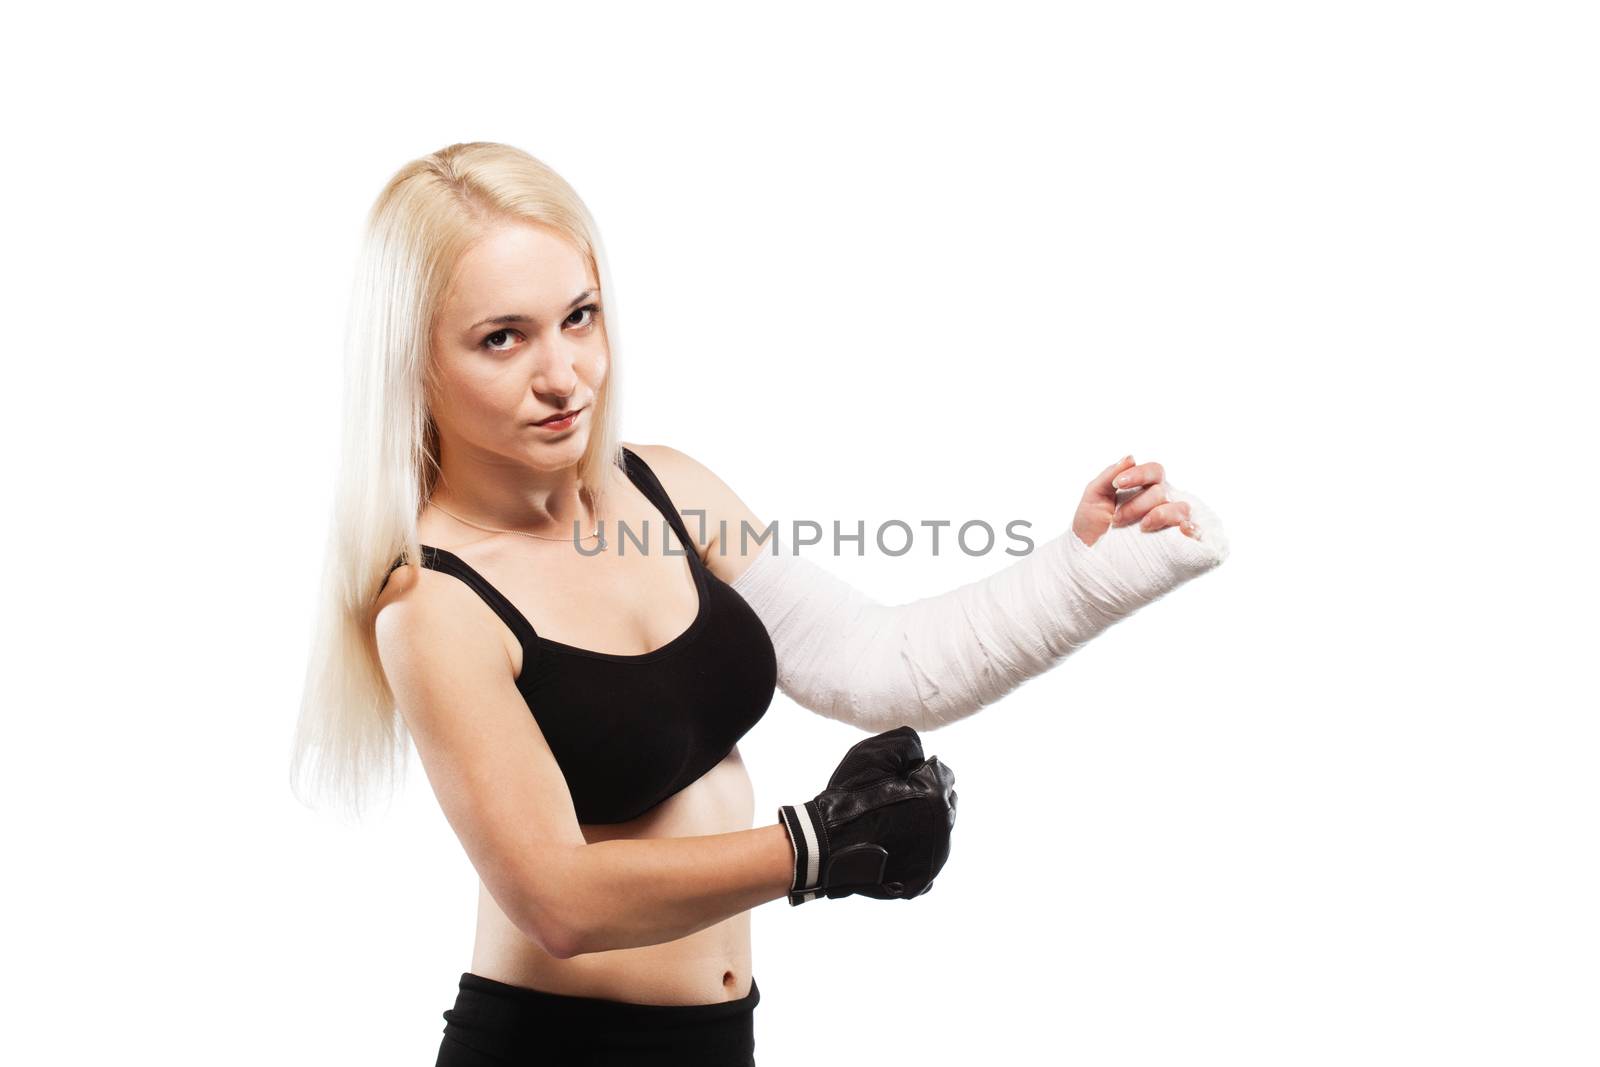 Fitness girl with a broken arm by kokimk